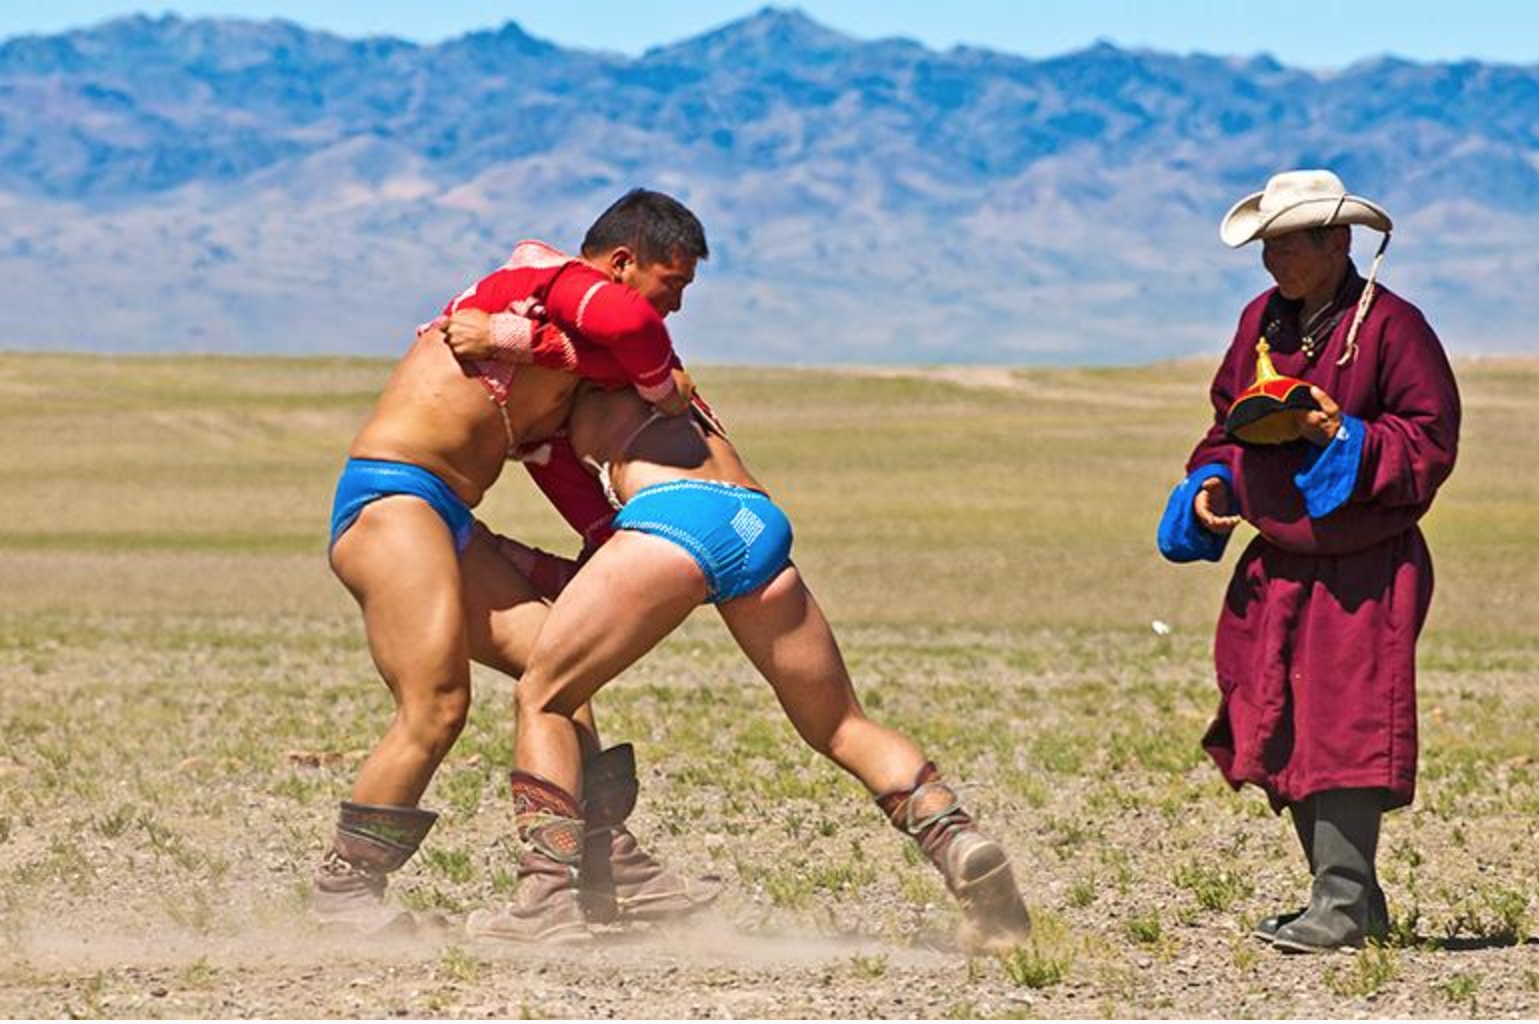 Mongolian wrestlers - wrestling is a top fact about Mongolia